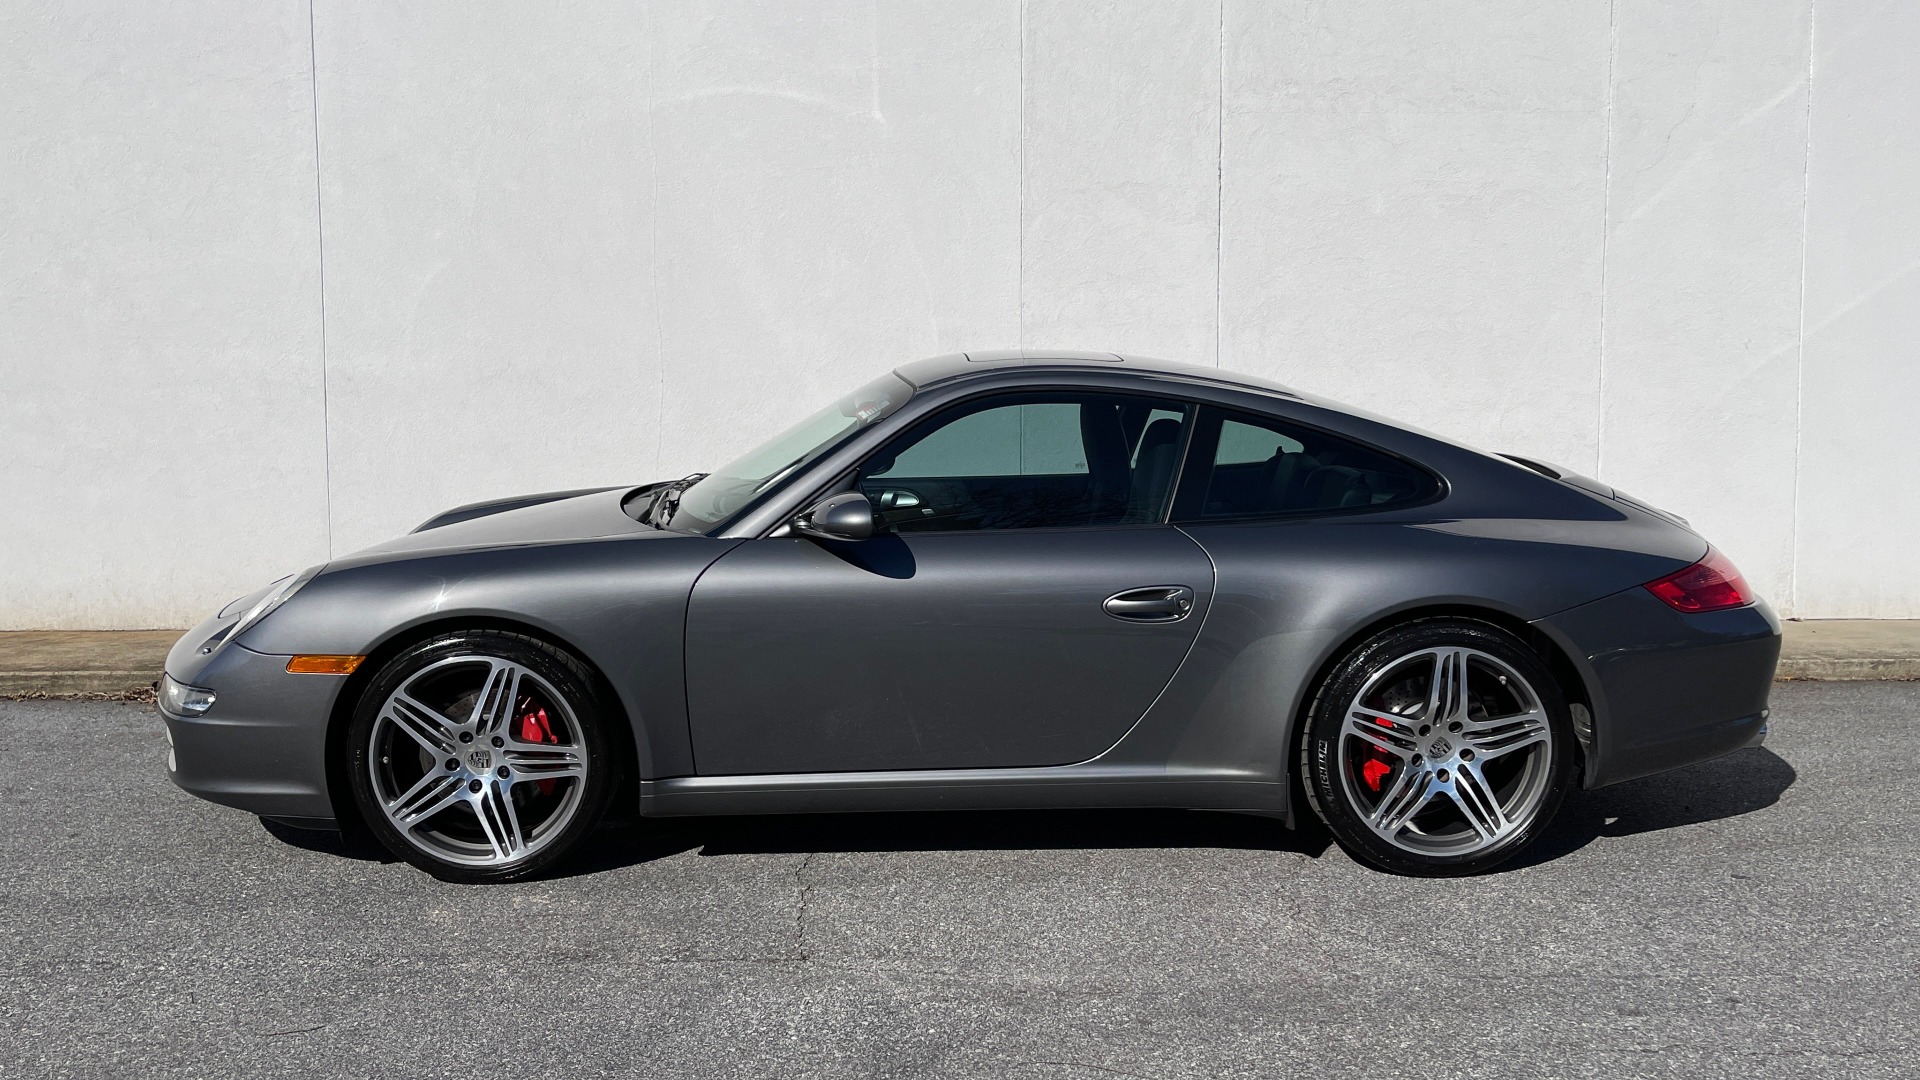 Used 2008 Porsche 911 CARRERA S COUPE / 3.8L / 6-SPEED MANUAL / BOSE for sale Sold at Formula Imports in Charlotte NC 28227 3